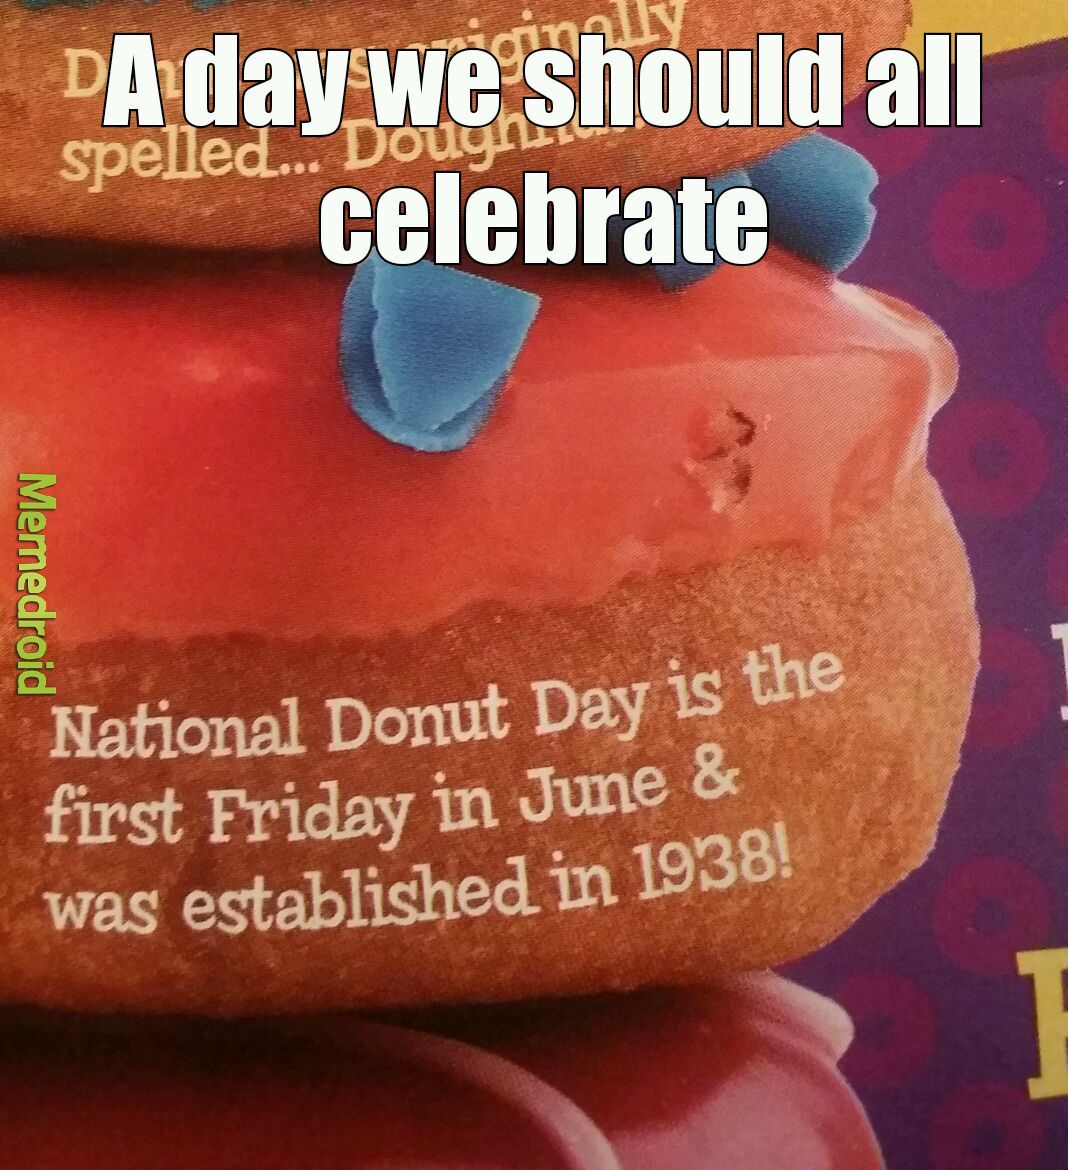 Donut shops will prob give away free donuts - meme